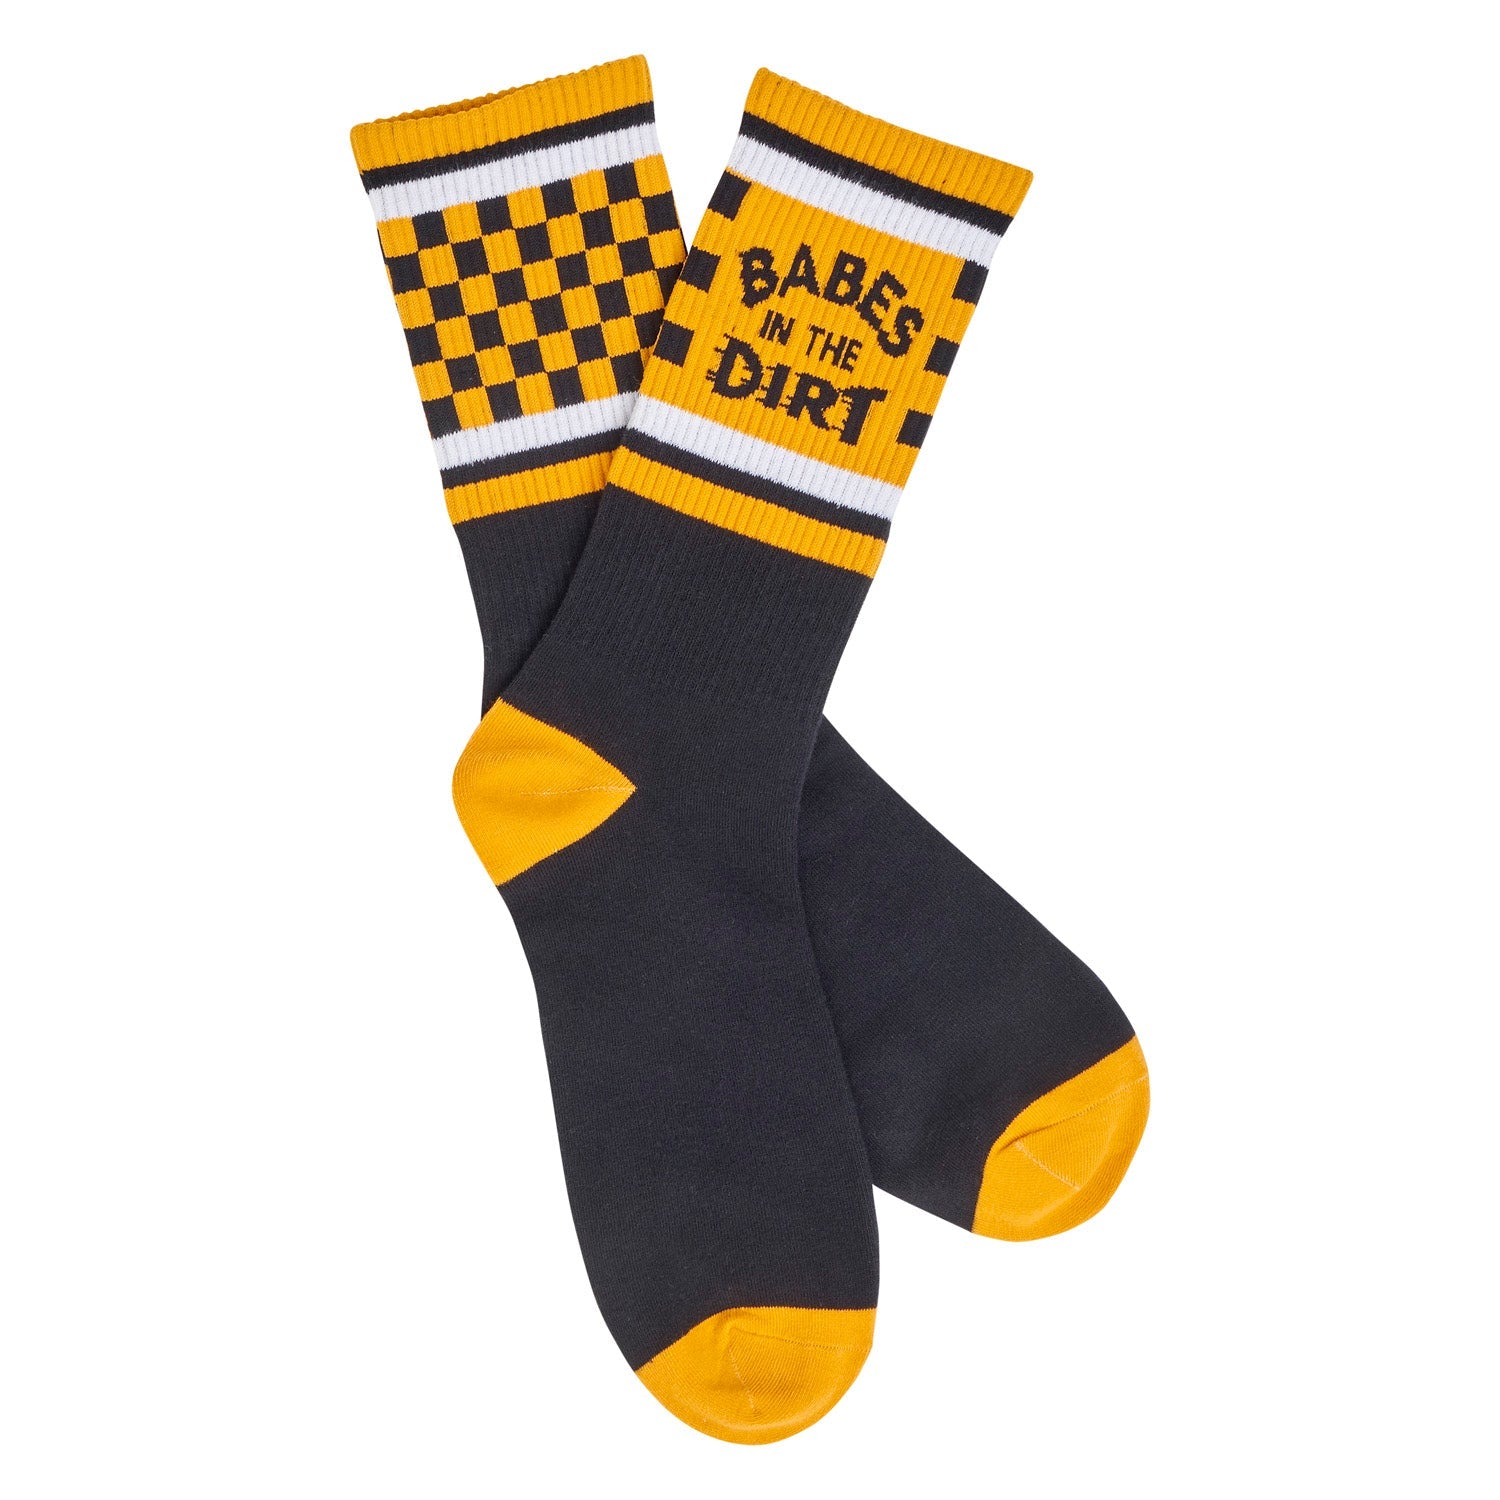 Best of Babes in socks